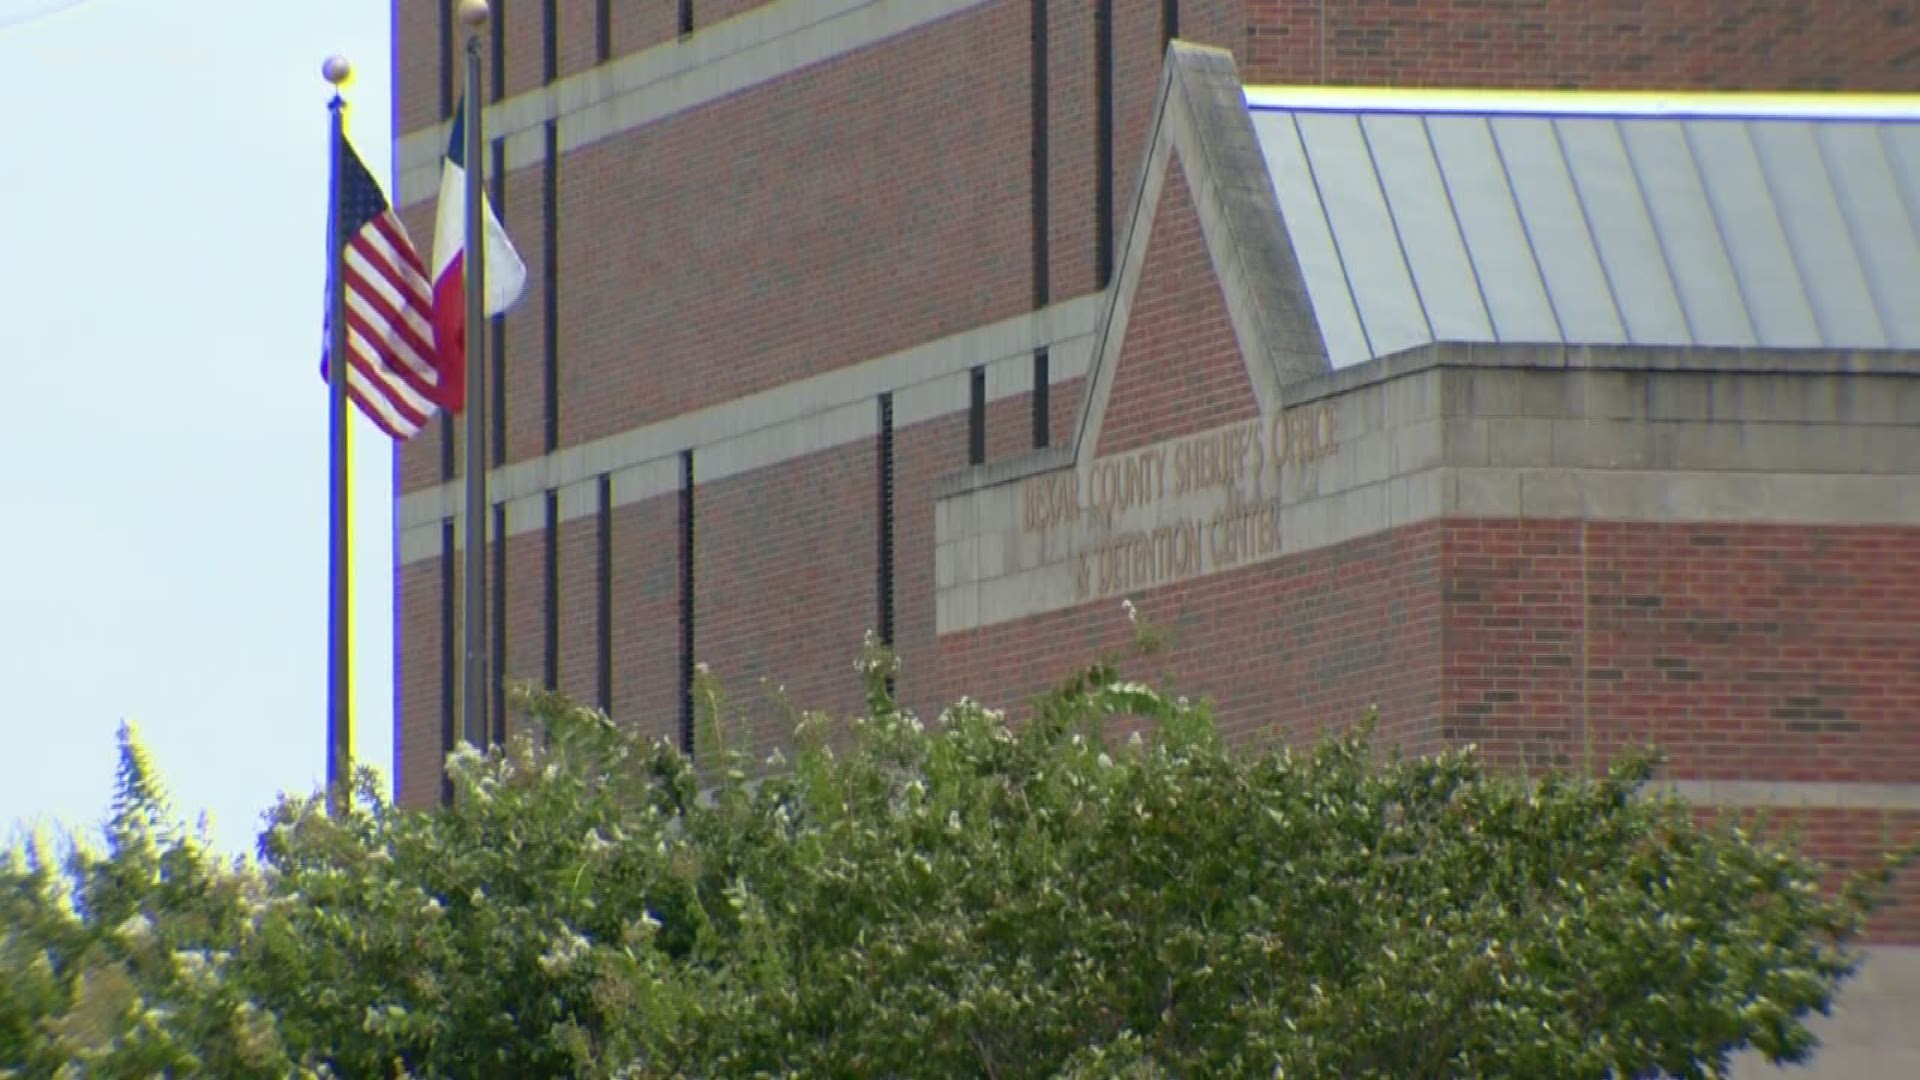 Officials have confirmed a 24-year-old inmate died at the Bexar County Jail Thursday morning.